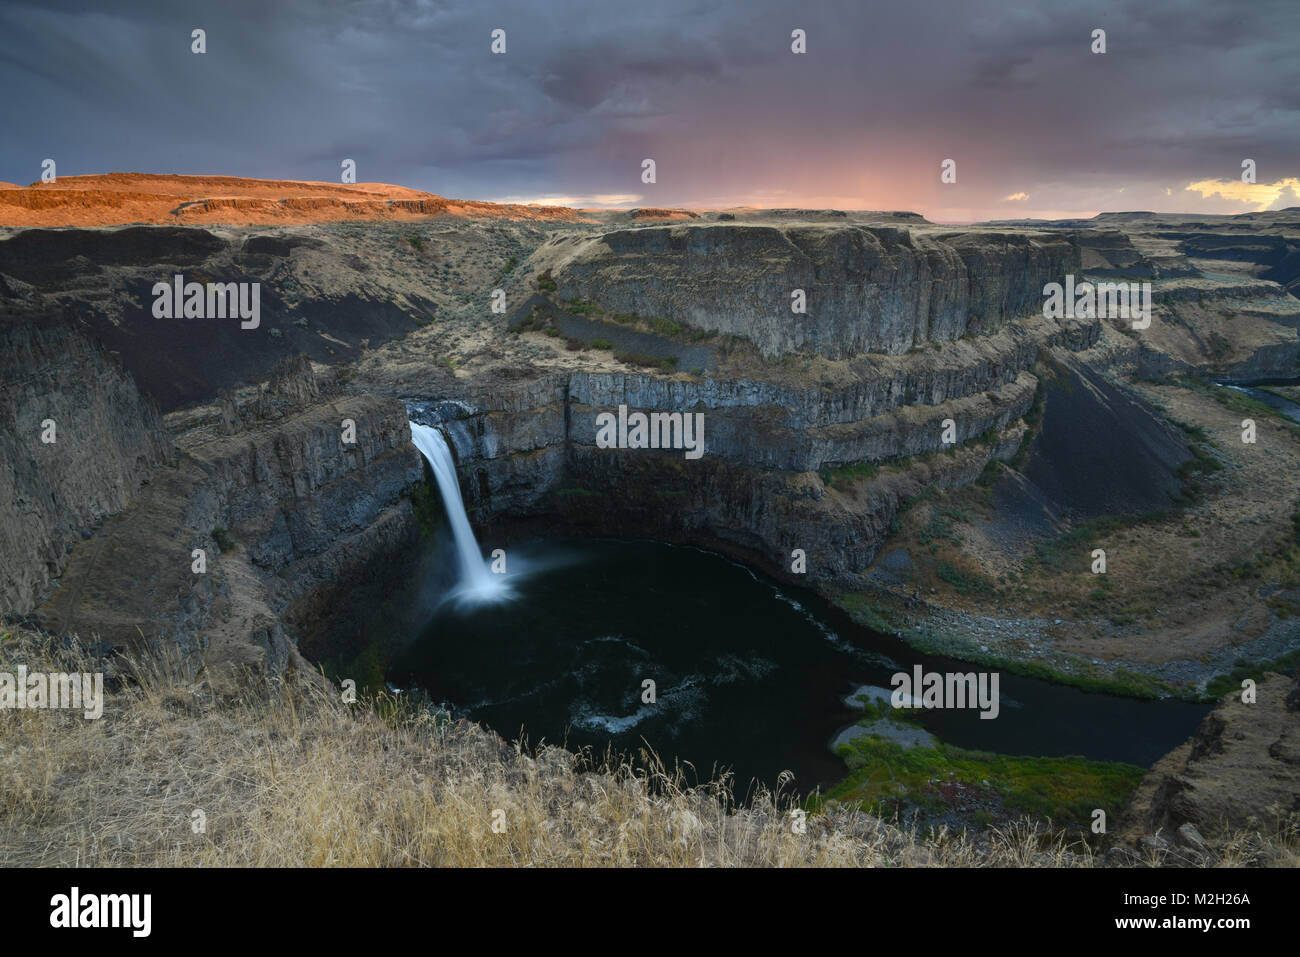 Blurred long exposure of the iconic Palouse Falls state park in Washington state, USA at sunset Stock Photo